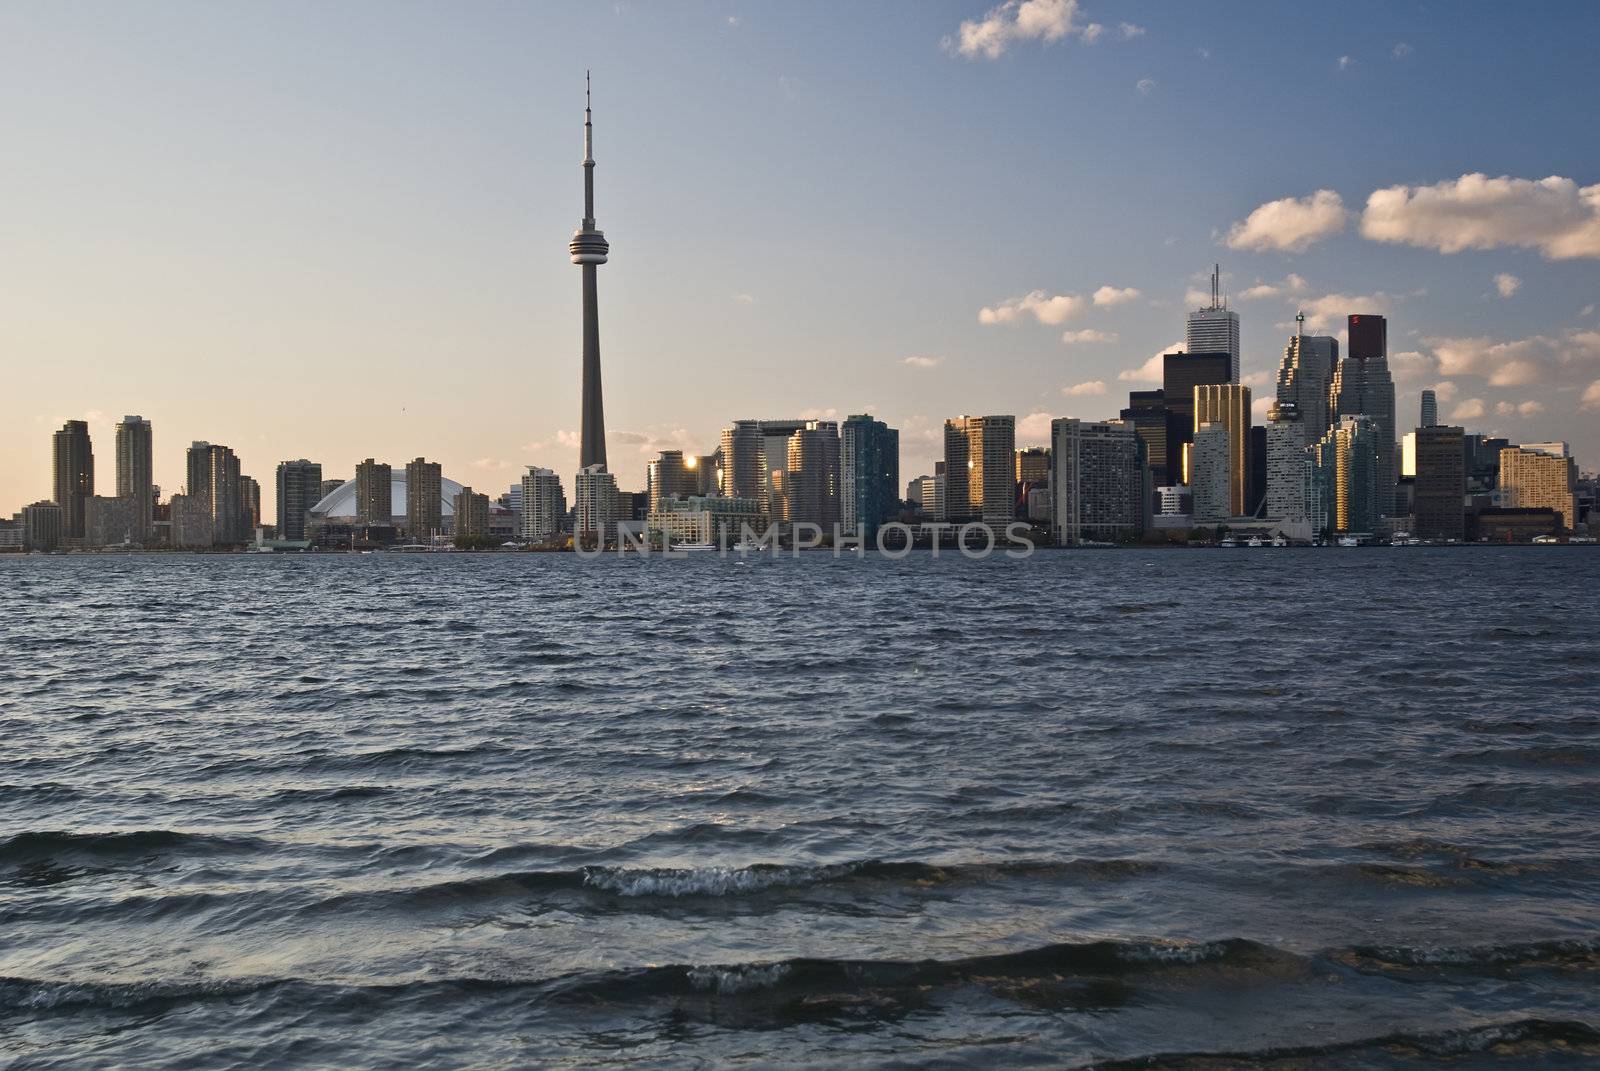 Toronto city scape view from the lake Ontario